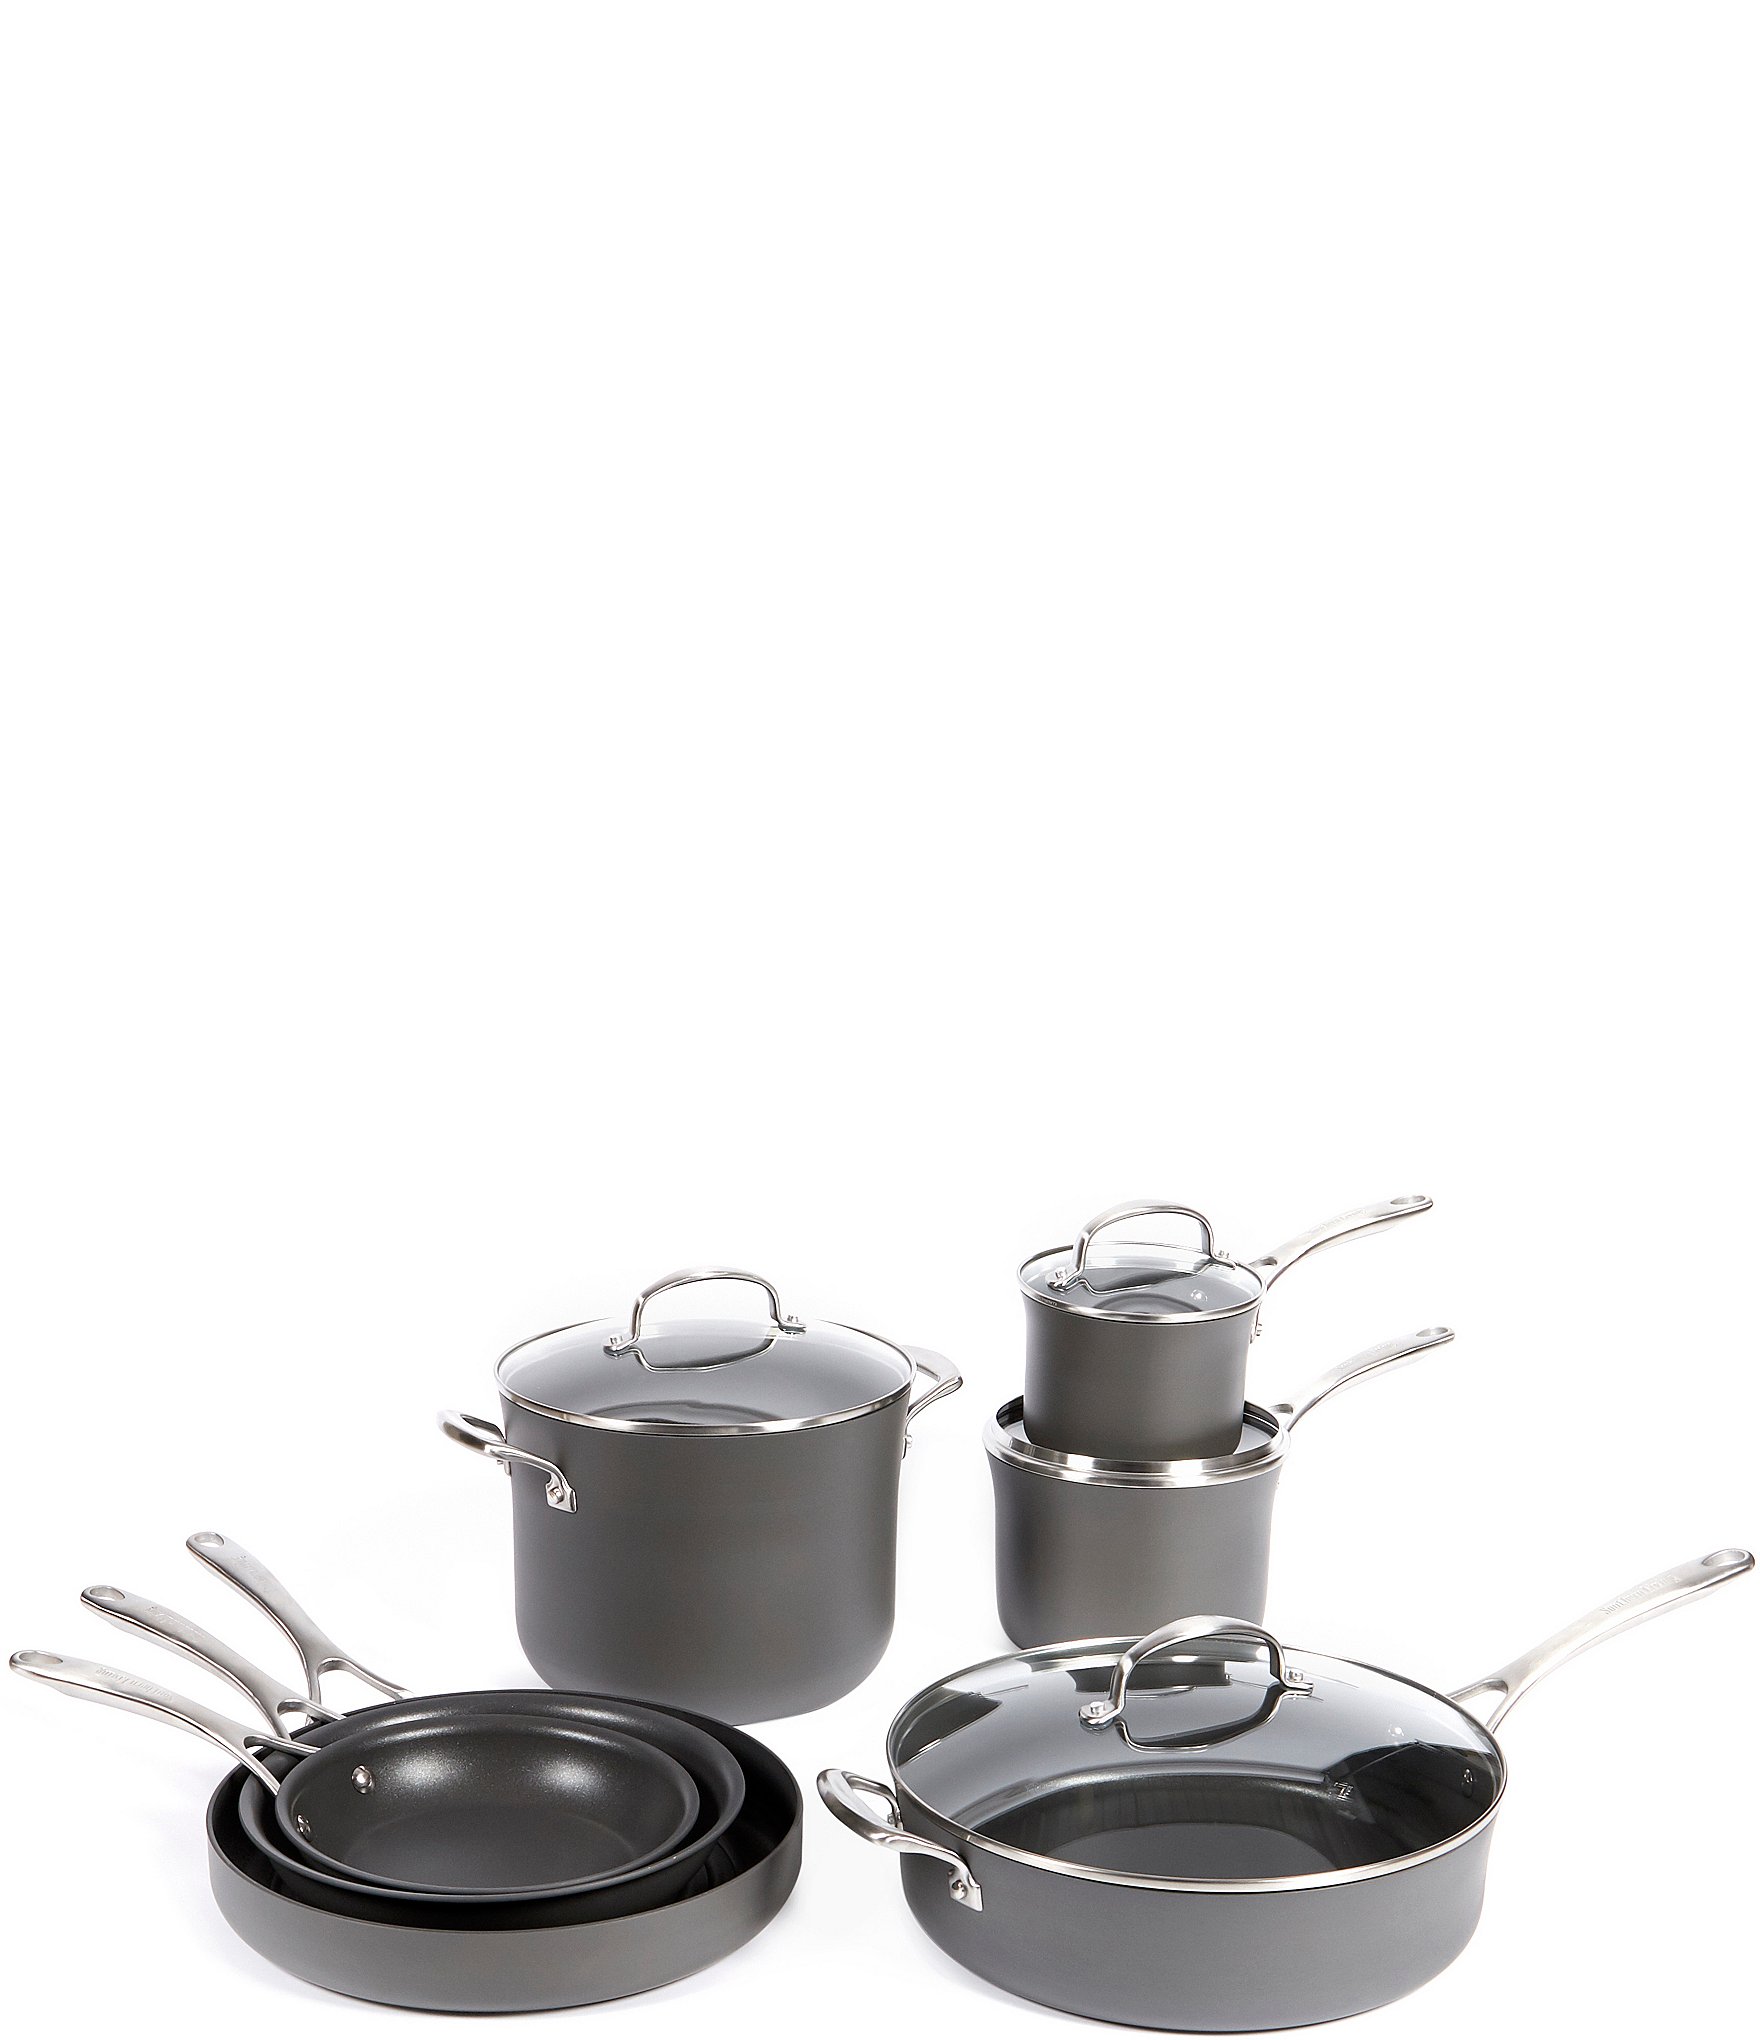 https://dimg.dillards.com/is/image/DillardsZoom/zoom/southern-living-kitchen-solution-collection-11-piece-hard-anodized-nonstick-cookware-set/20056680_zi.jpg